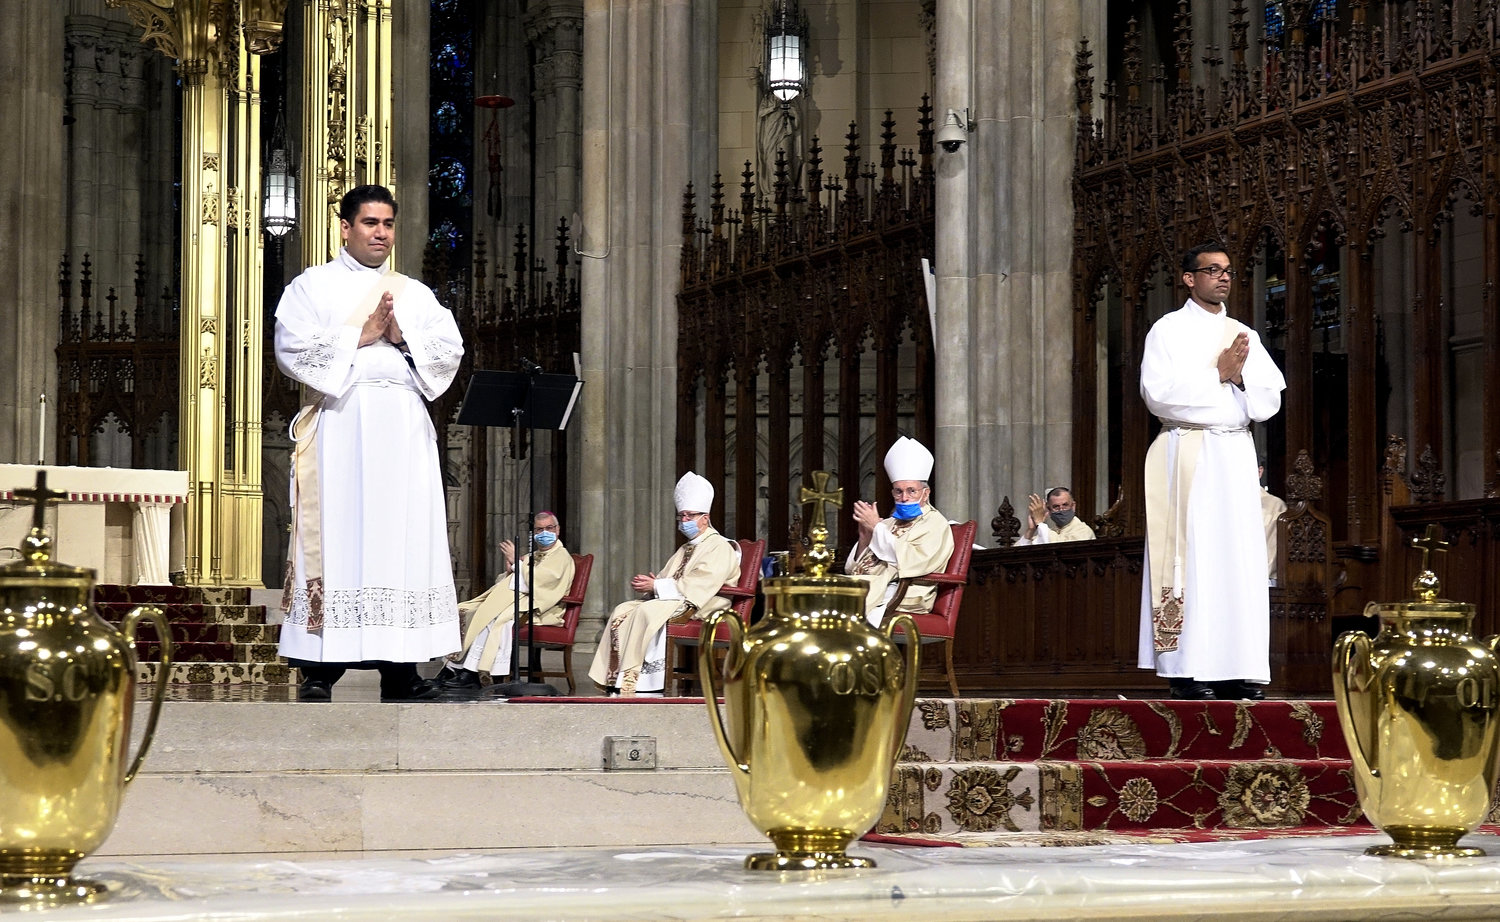 The two newly ordained priests, Father Luis Silva and Father Roland Pereira, M.Id., receive the applause of the congregation at St. Patrick's Cathedral.